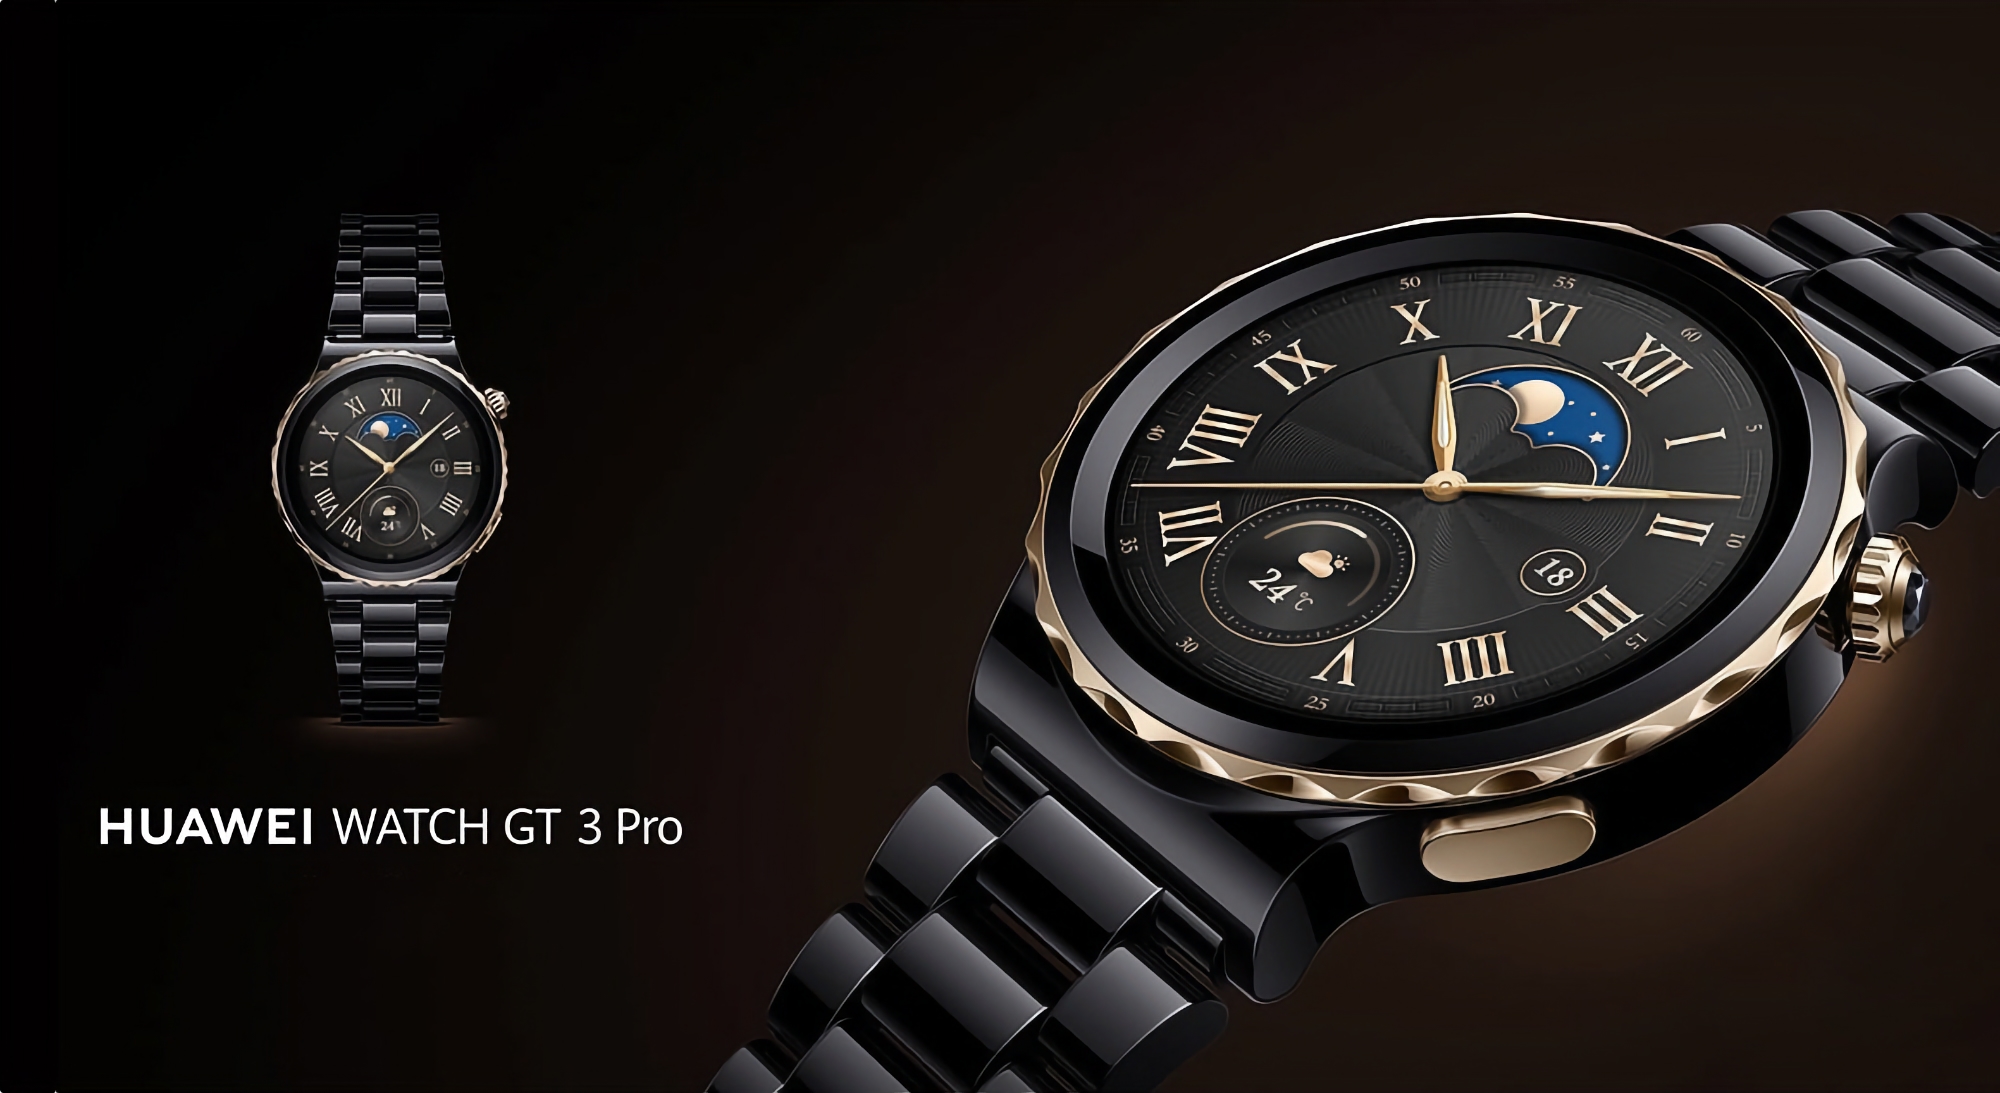 Huawei Watch GT 3 Pro received update 3.0.0.101: what's new